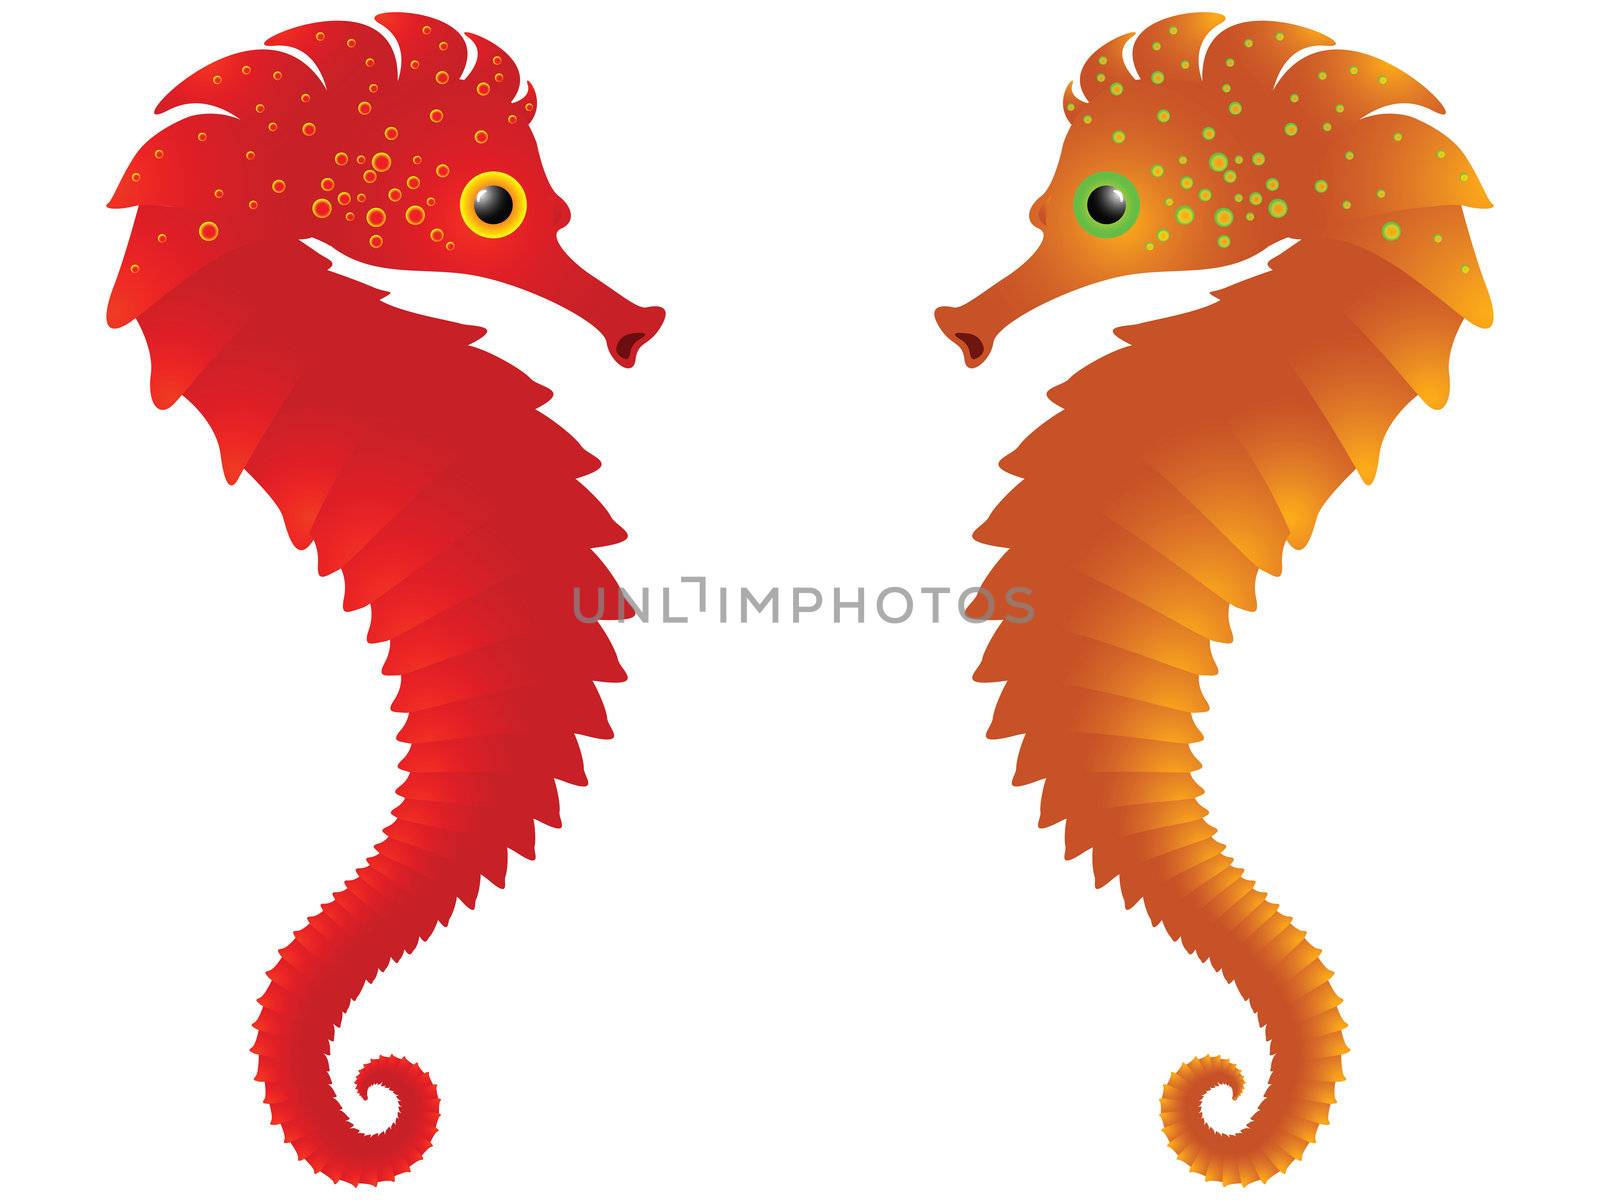 sea horses against white background, abstract vector art illustration